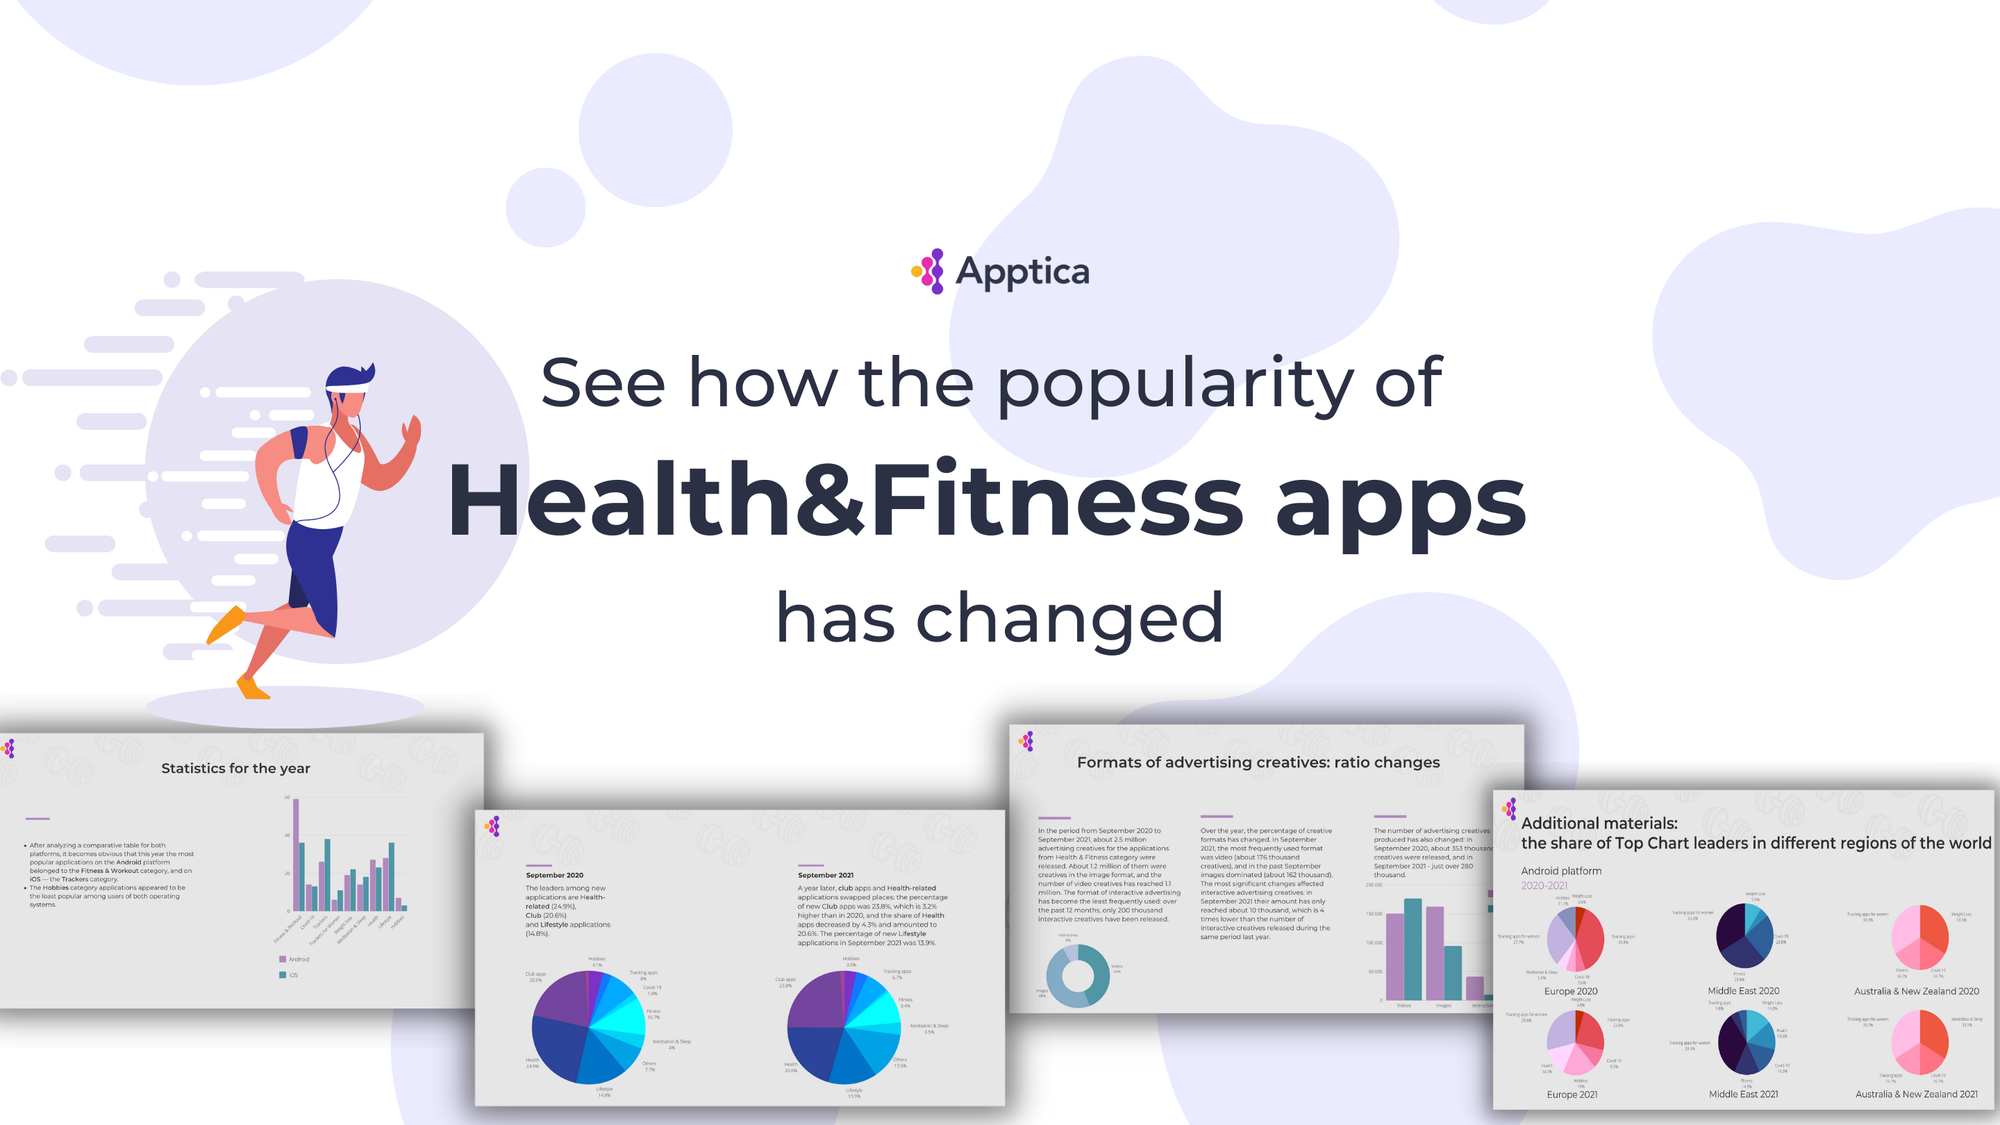 Health & Fitness apps in a rapidly changing environment: new report by Apptica